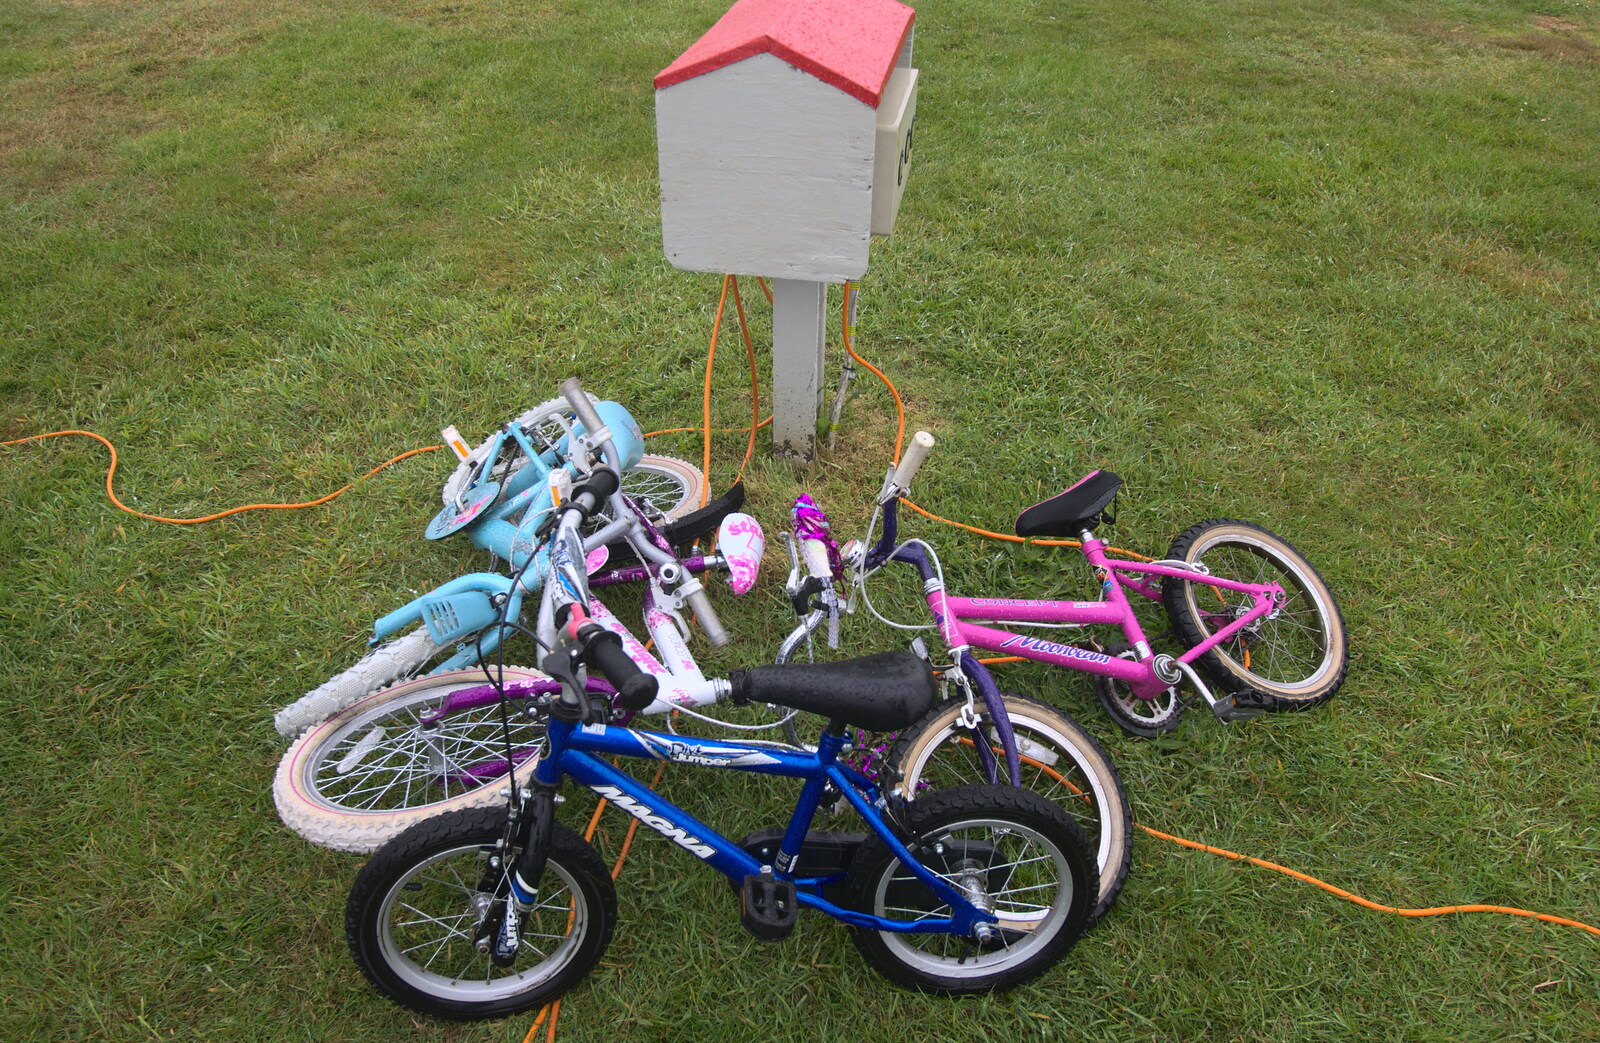 A pile of randomly-scattered child bicycles from A Wet Weekend of Camping, Waxham Sands, Norfolk - 13th June 2015